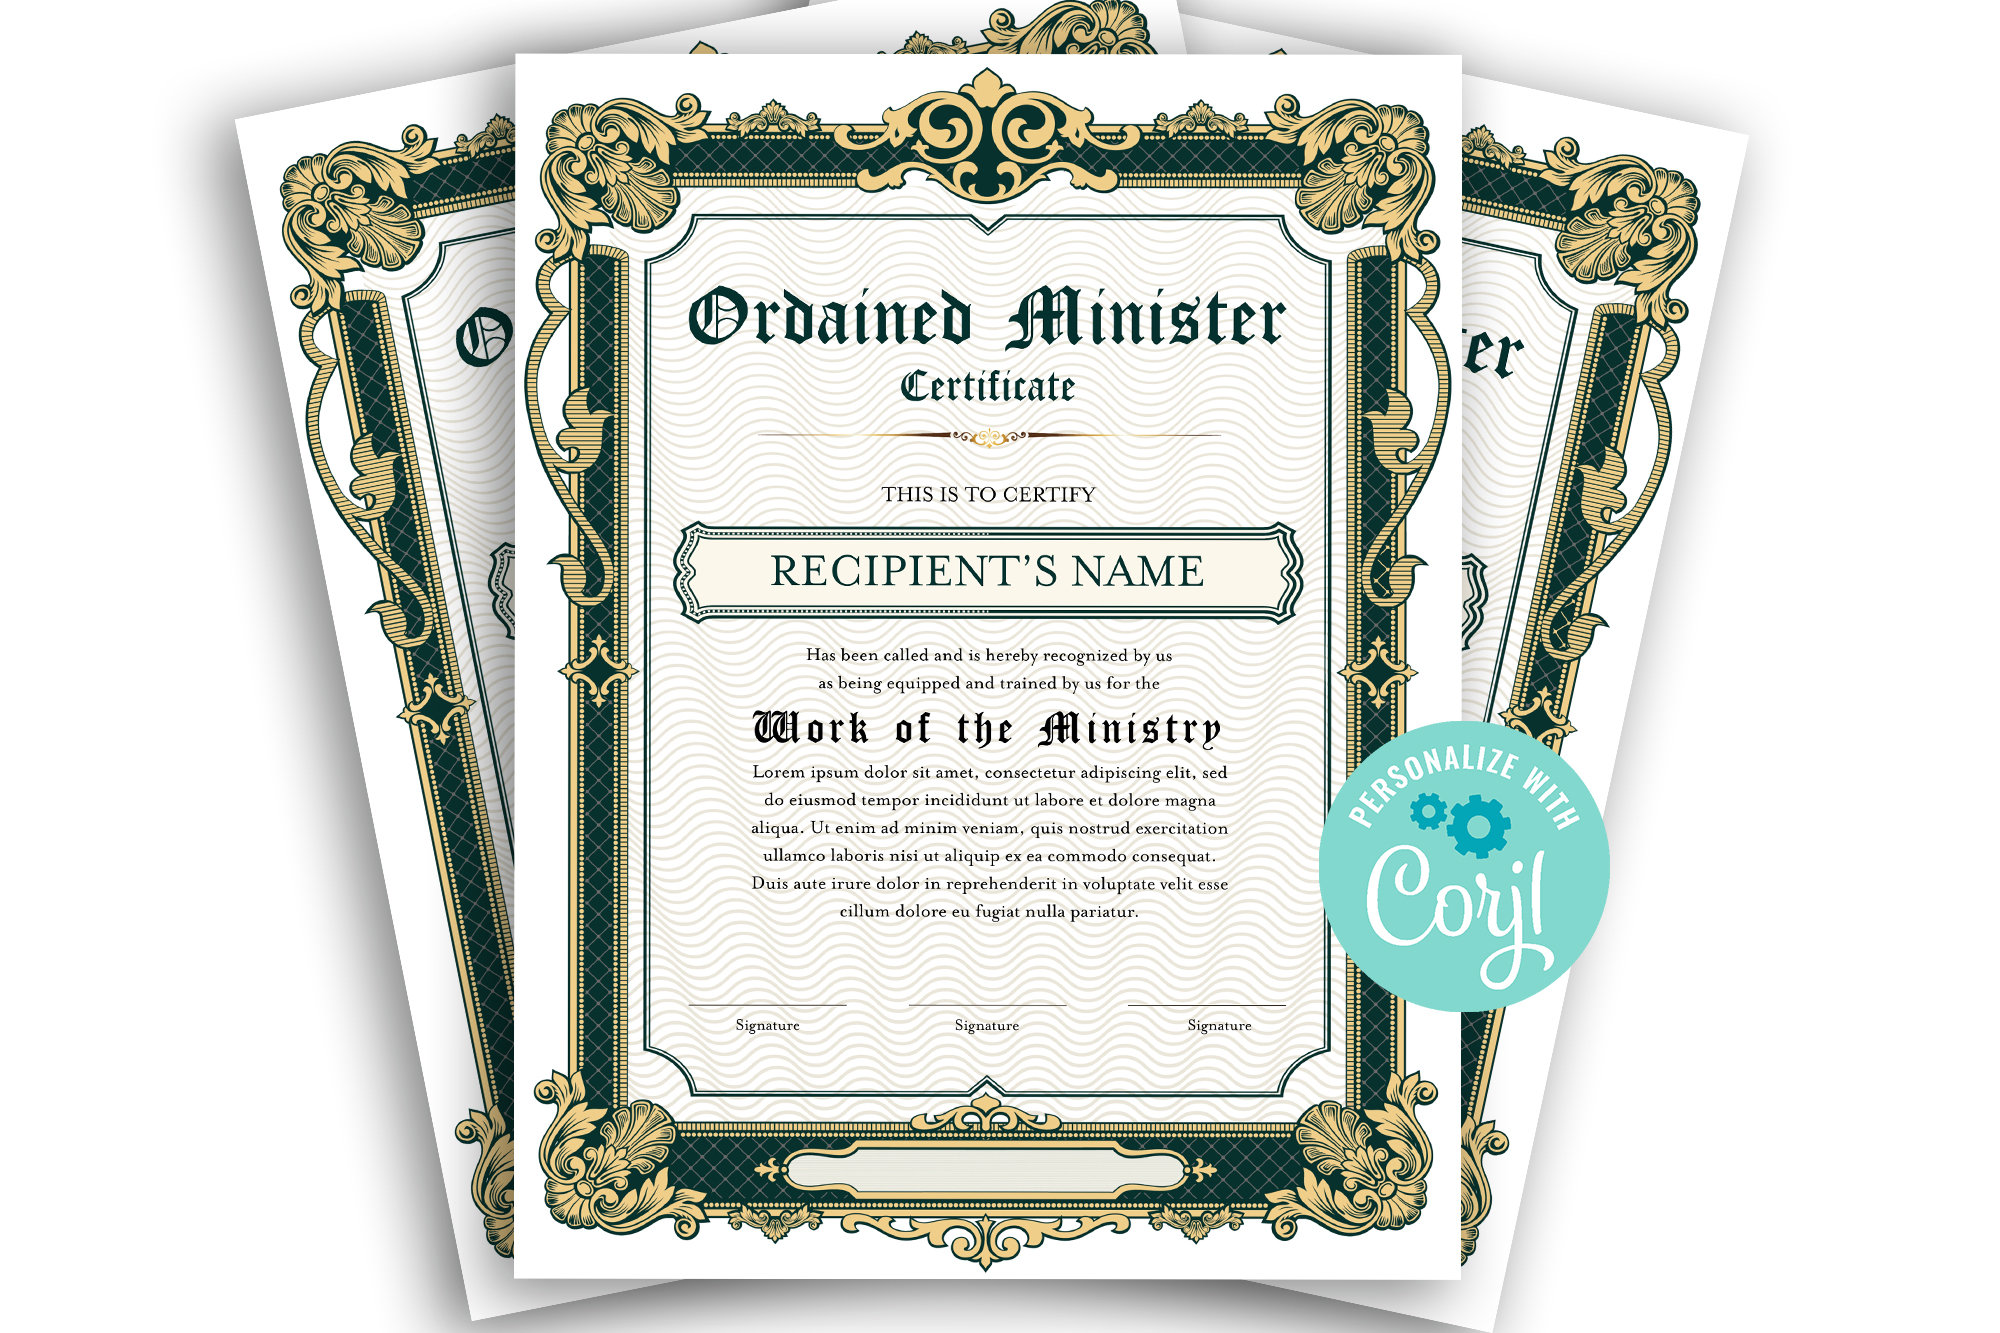 certificate-of-ordination-minister-editable-template-portrait-etsy